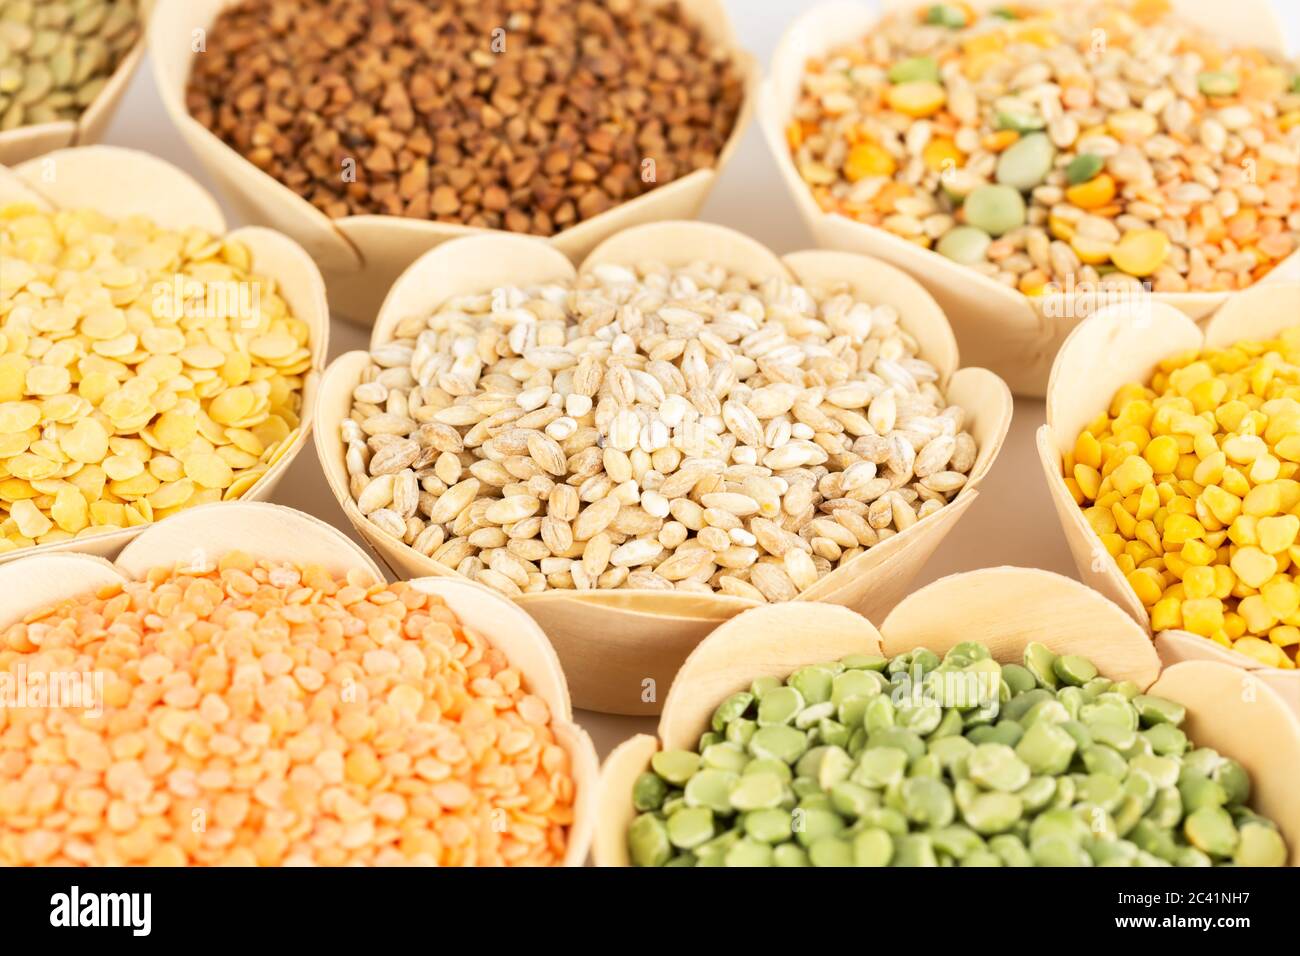 The collection of different groats in the bamboo bowls. Wheat, buckwheat, peas and lentils. Stock Photo